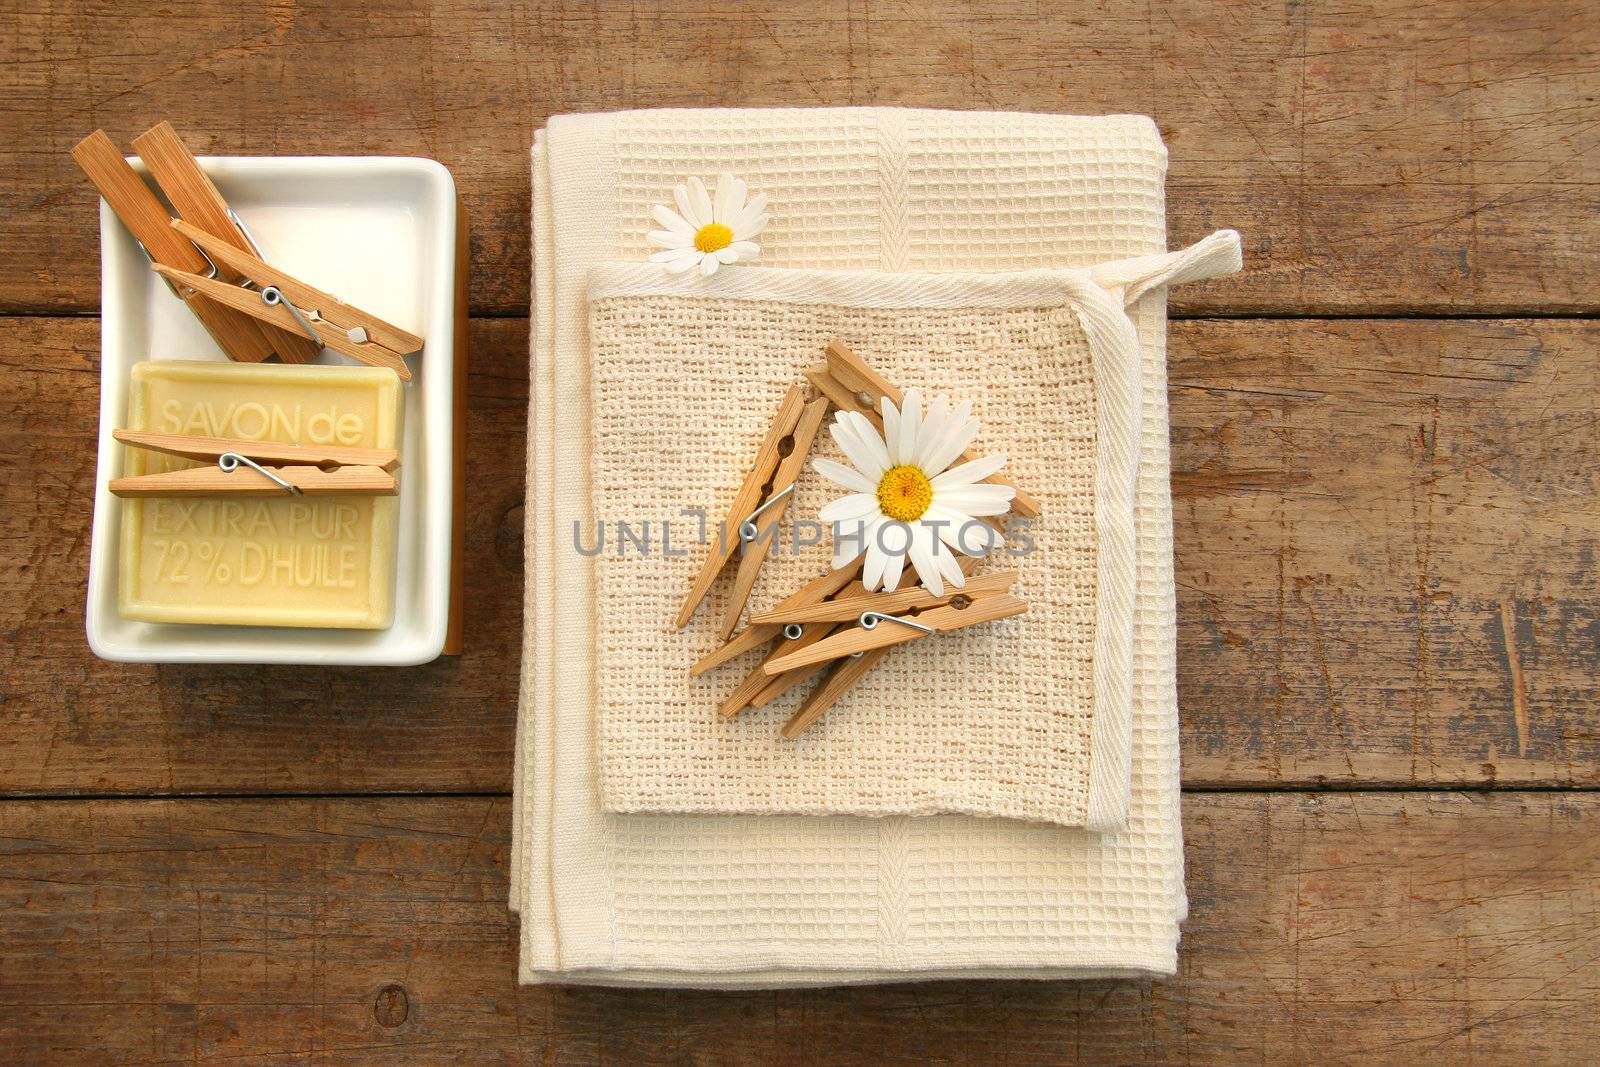 Soap, clothespins and towels on rustic table